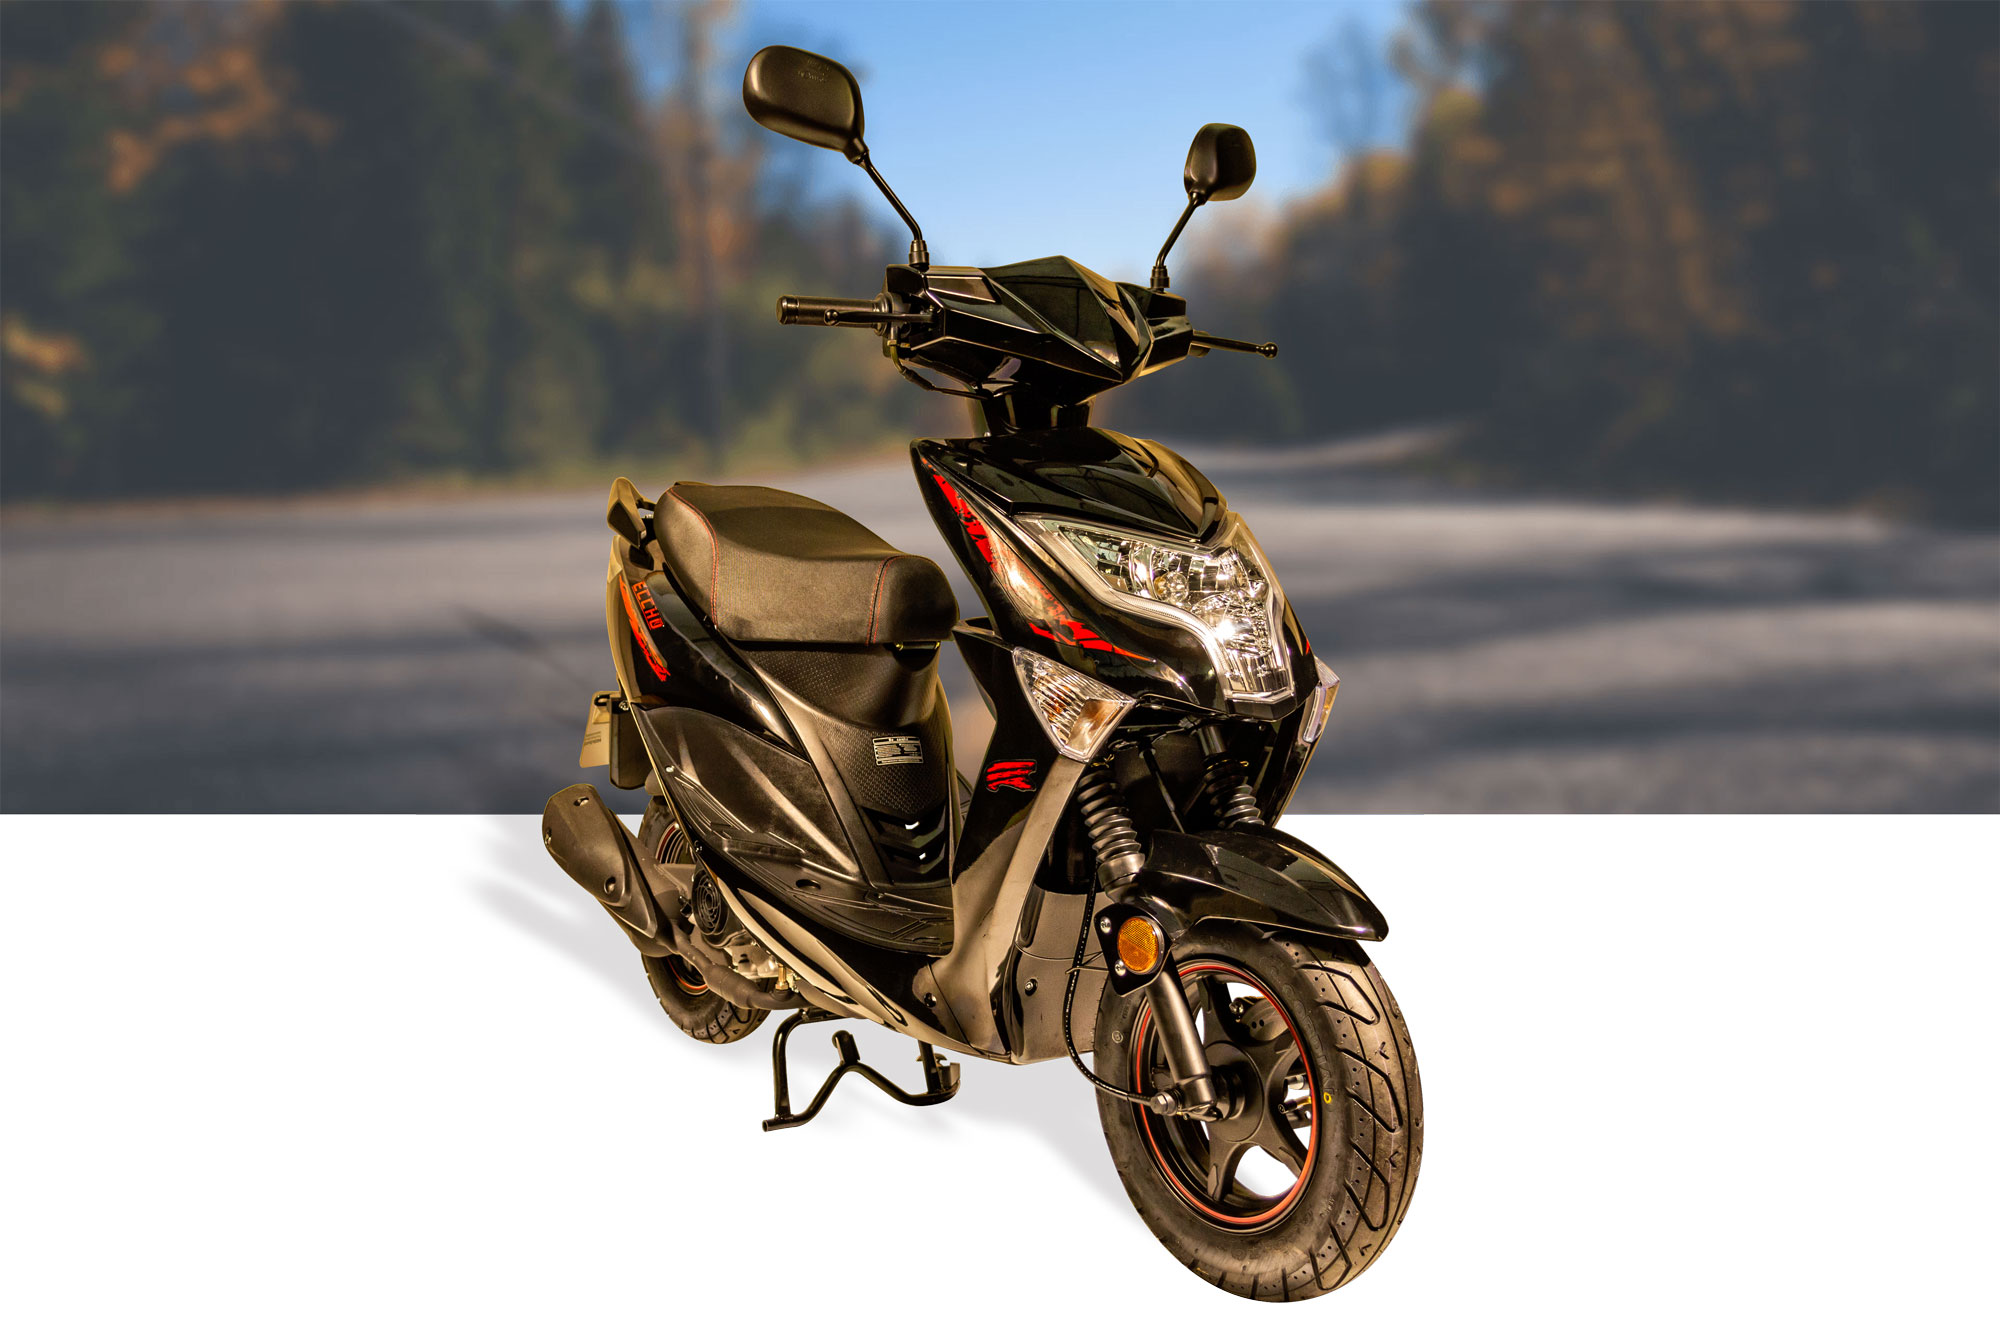 scooter-50-scooter-125-eccho-TY50QT-29D-FURIOUS